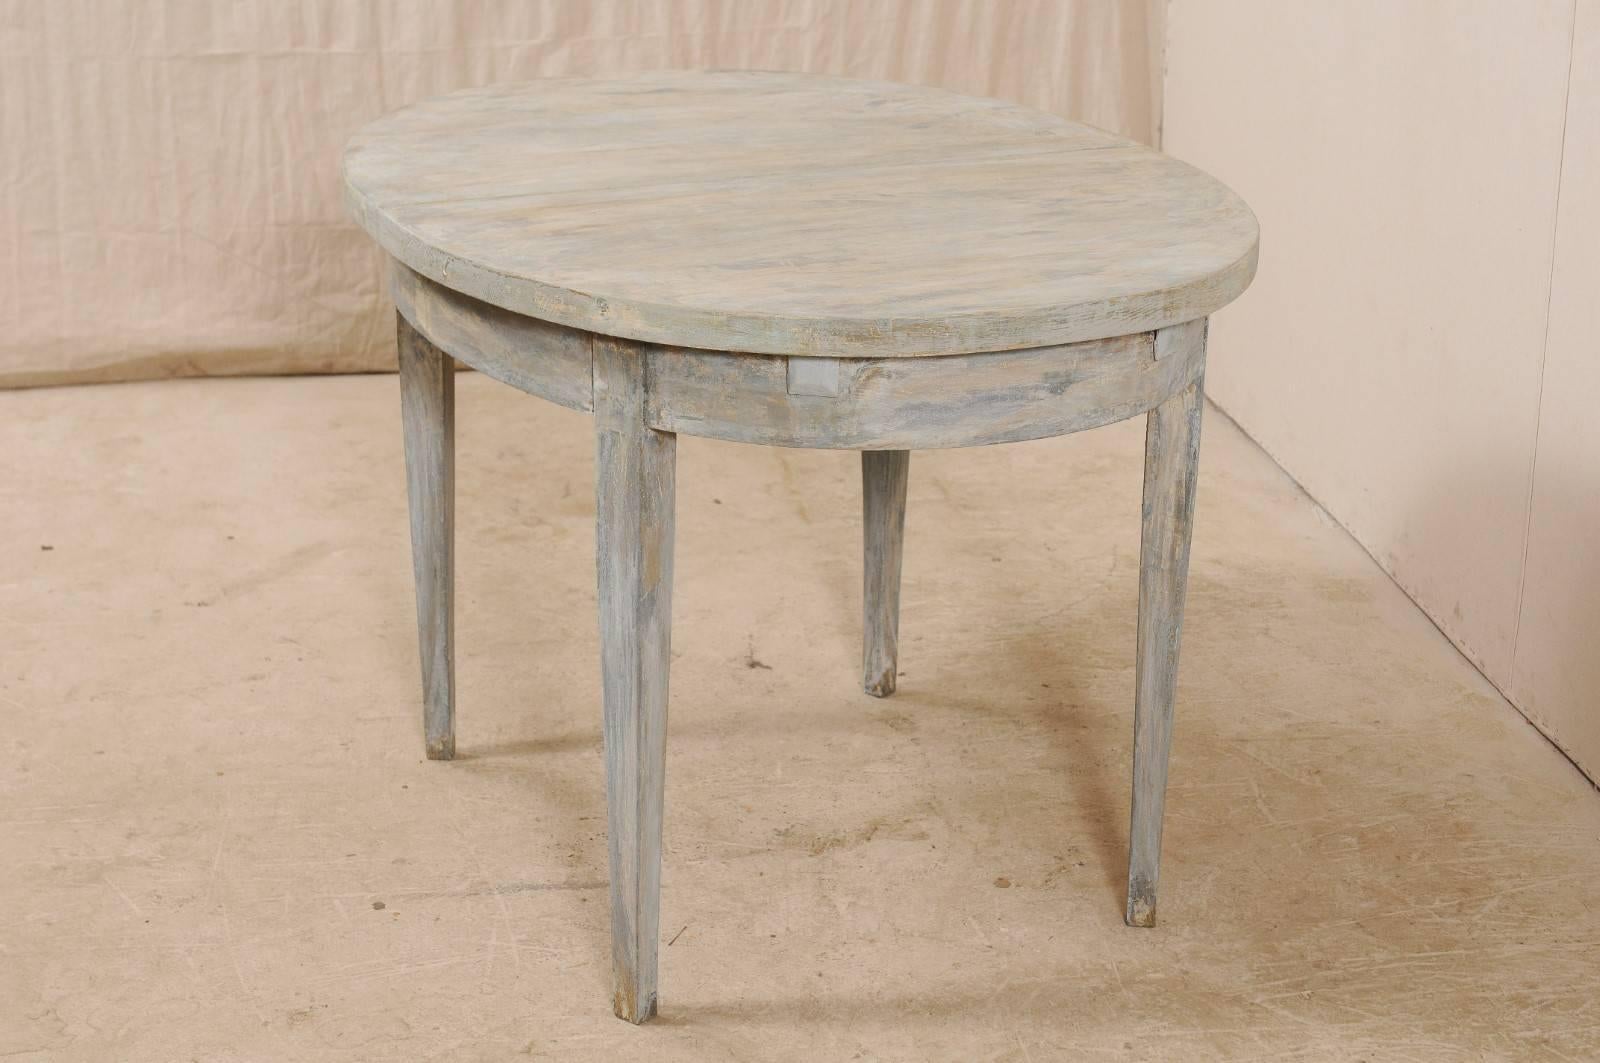 20th Century Swedish Midcentury Painted Wood Oval Occasional Table in Soft Blue-Grey